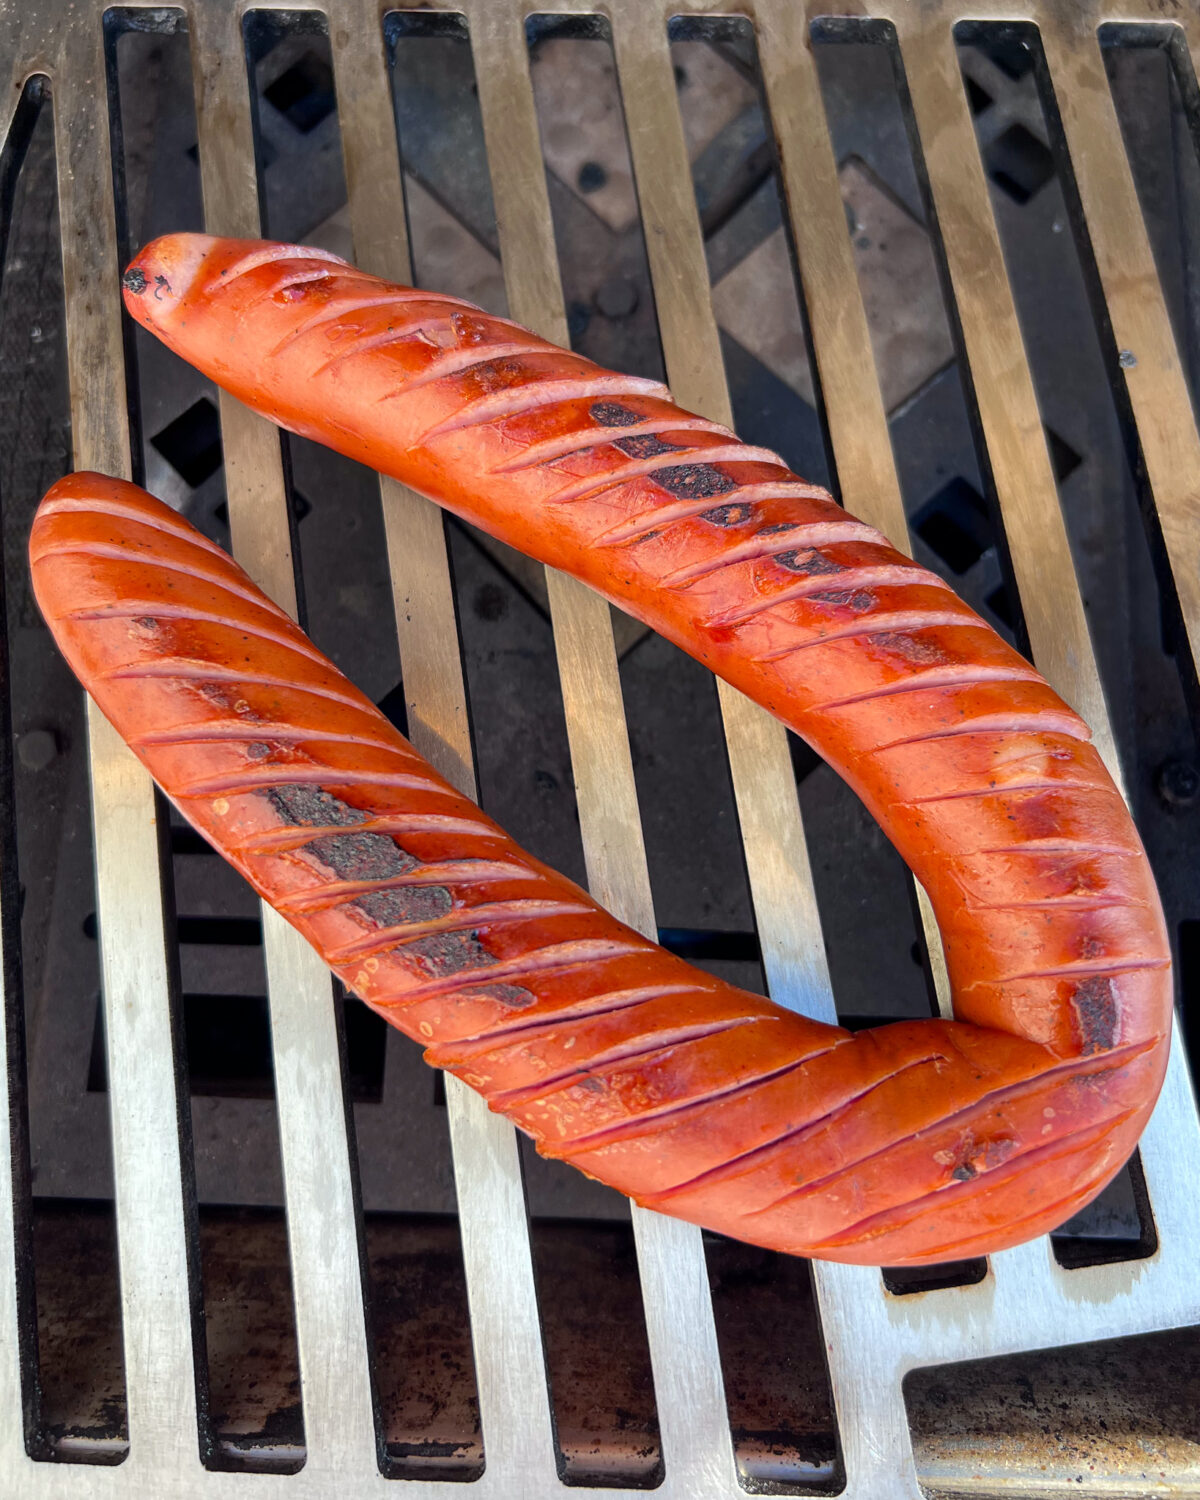 Scored sausage link on the grill.